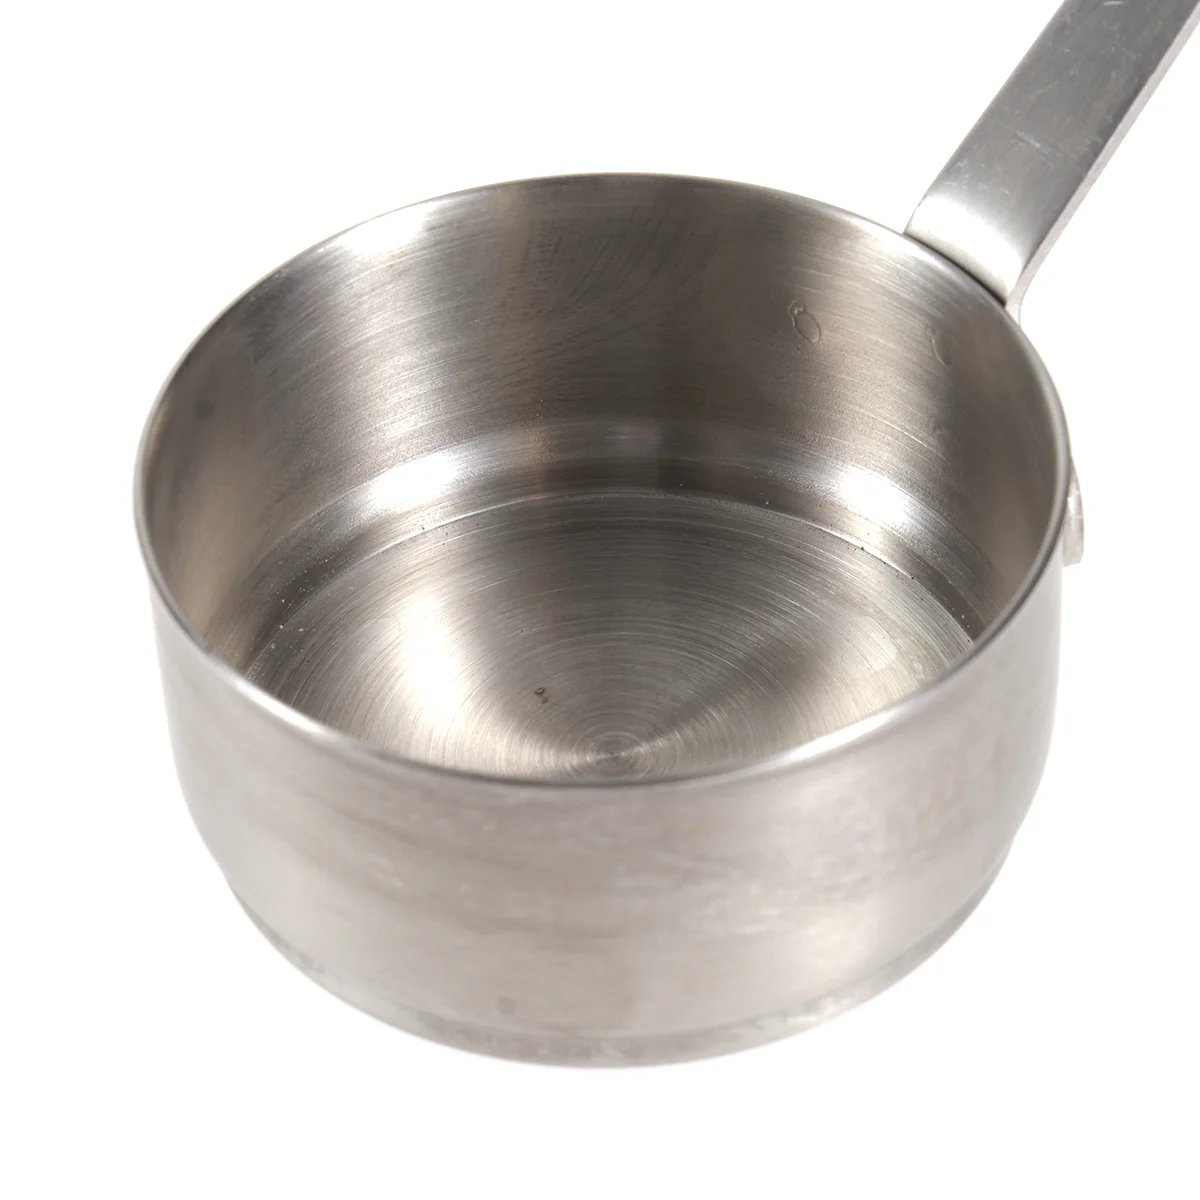 

Pan Pot Sauce Butter Mini Warmer Stainless Milk Steel Handle Melting Soup Heating Creamer Induction Bowl Non Dish Coffee